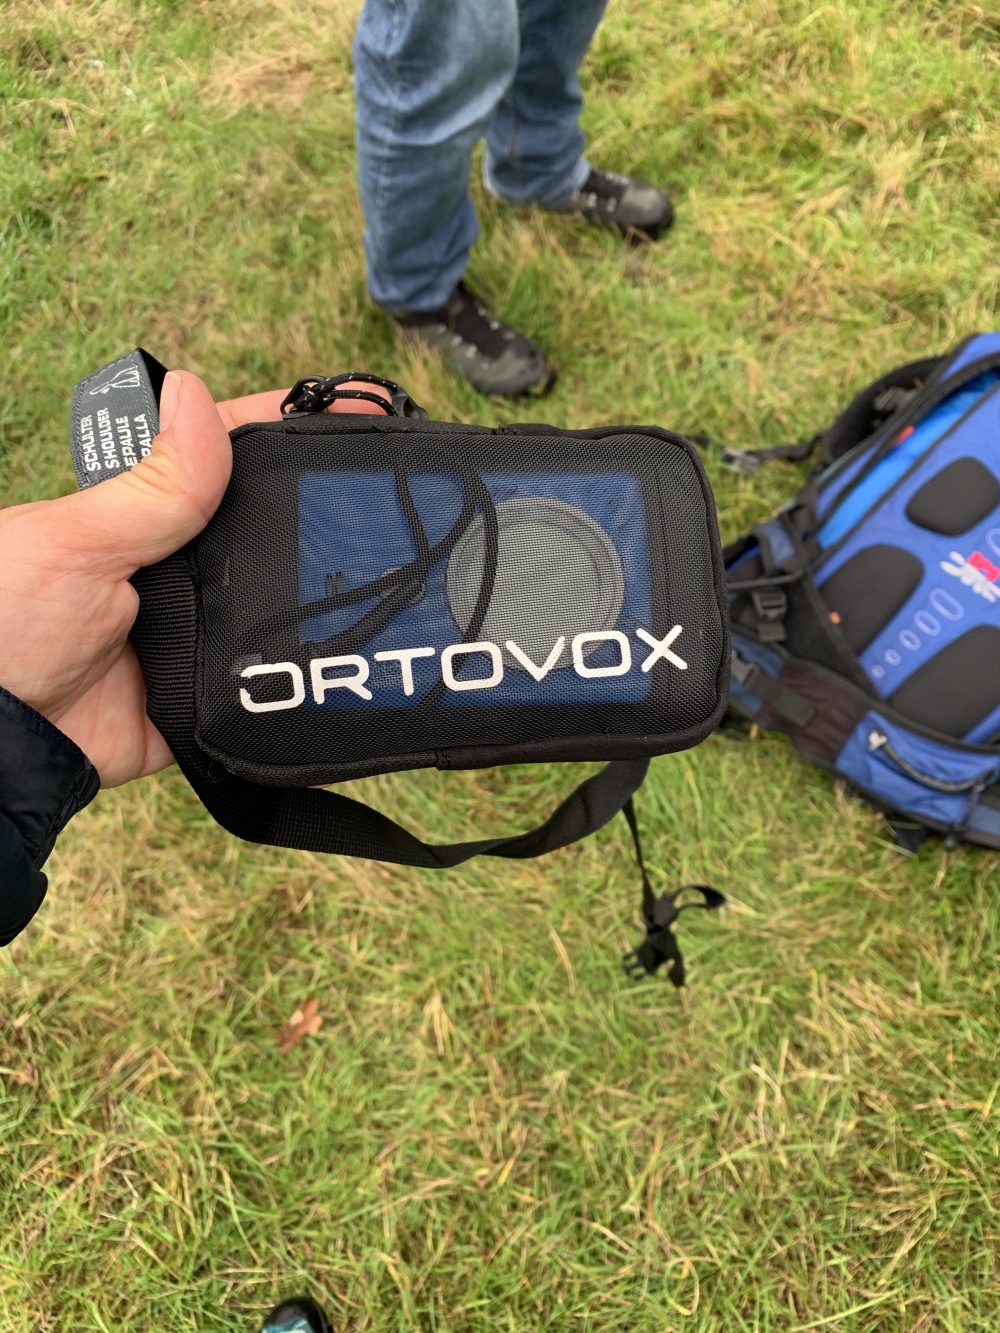 The Ortovox transceiver we've used for this course of Henry's Avalanche Talk. If thinking in going off-piste this season, you MUST be safe aware. 